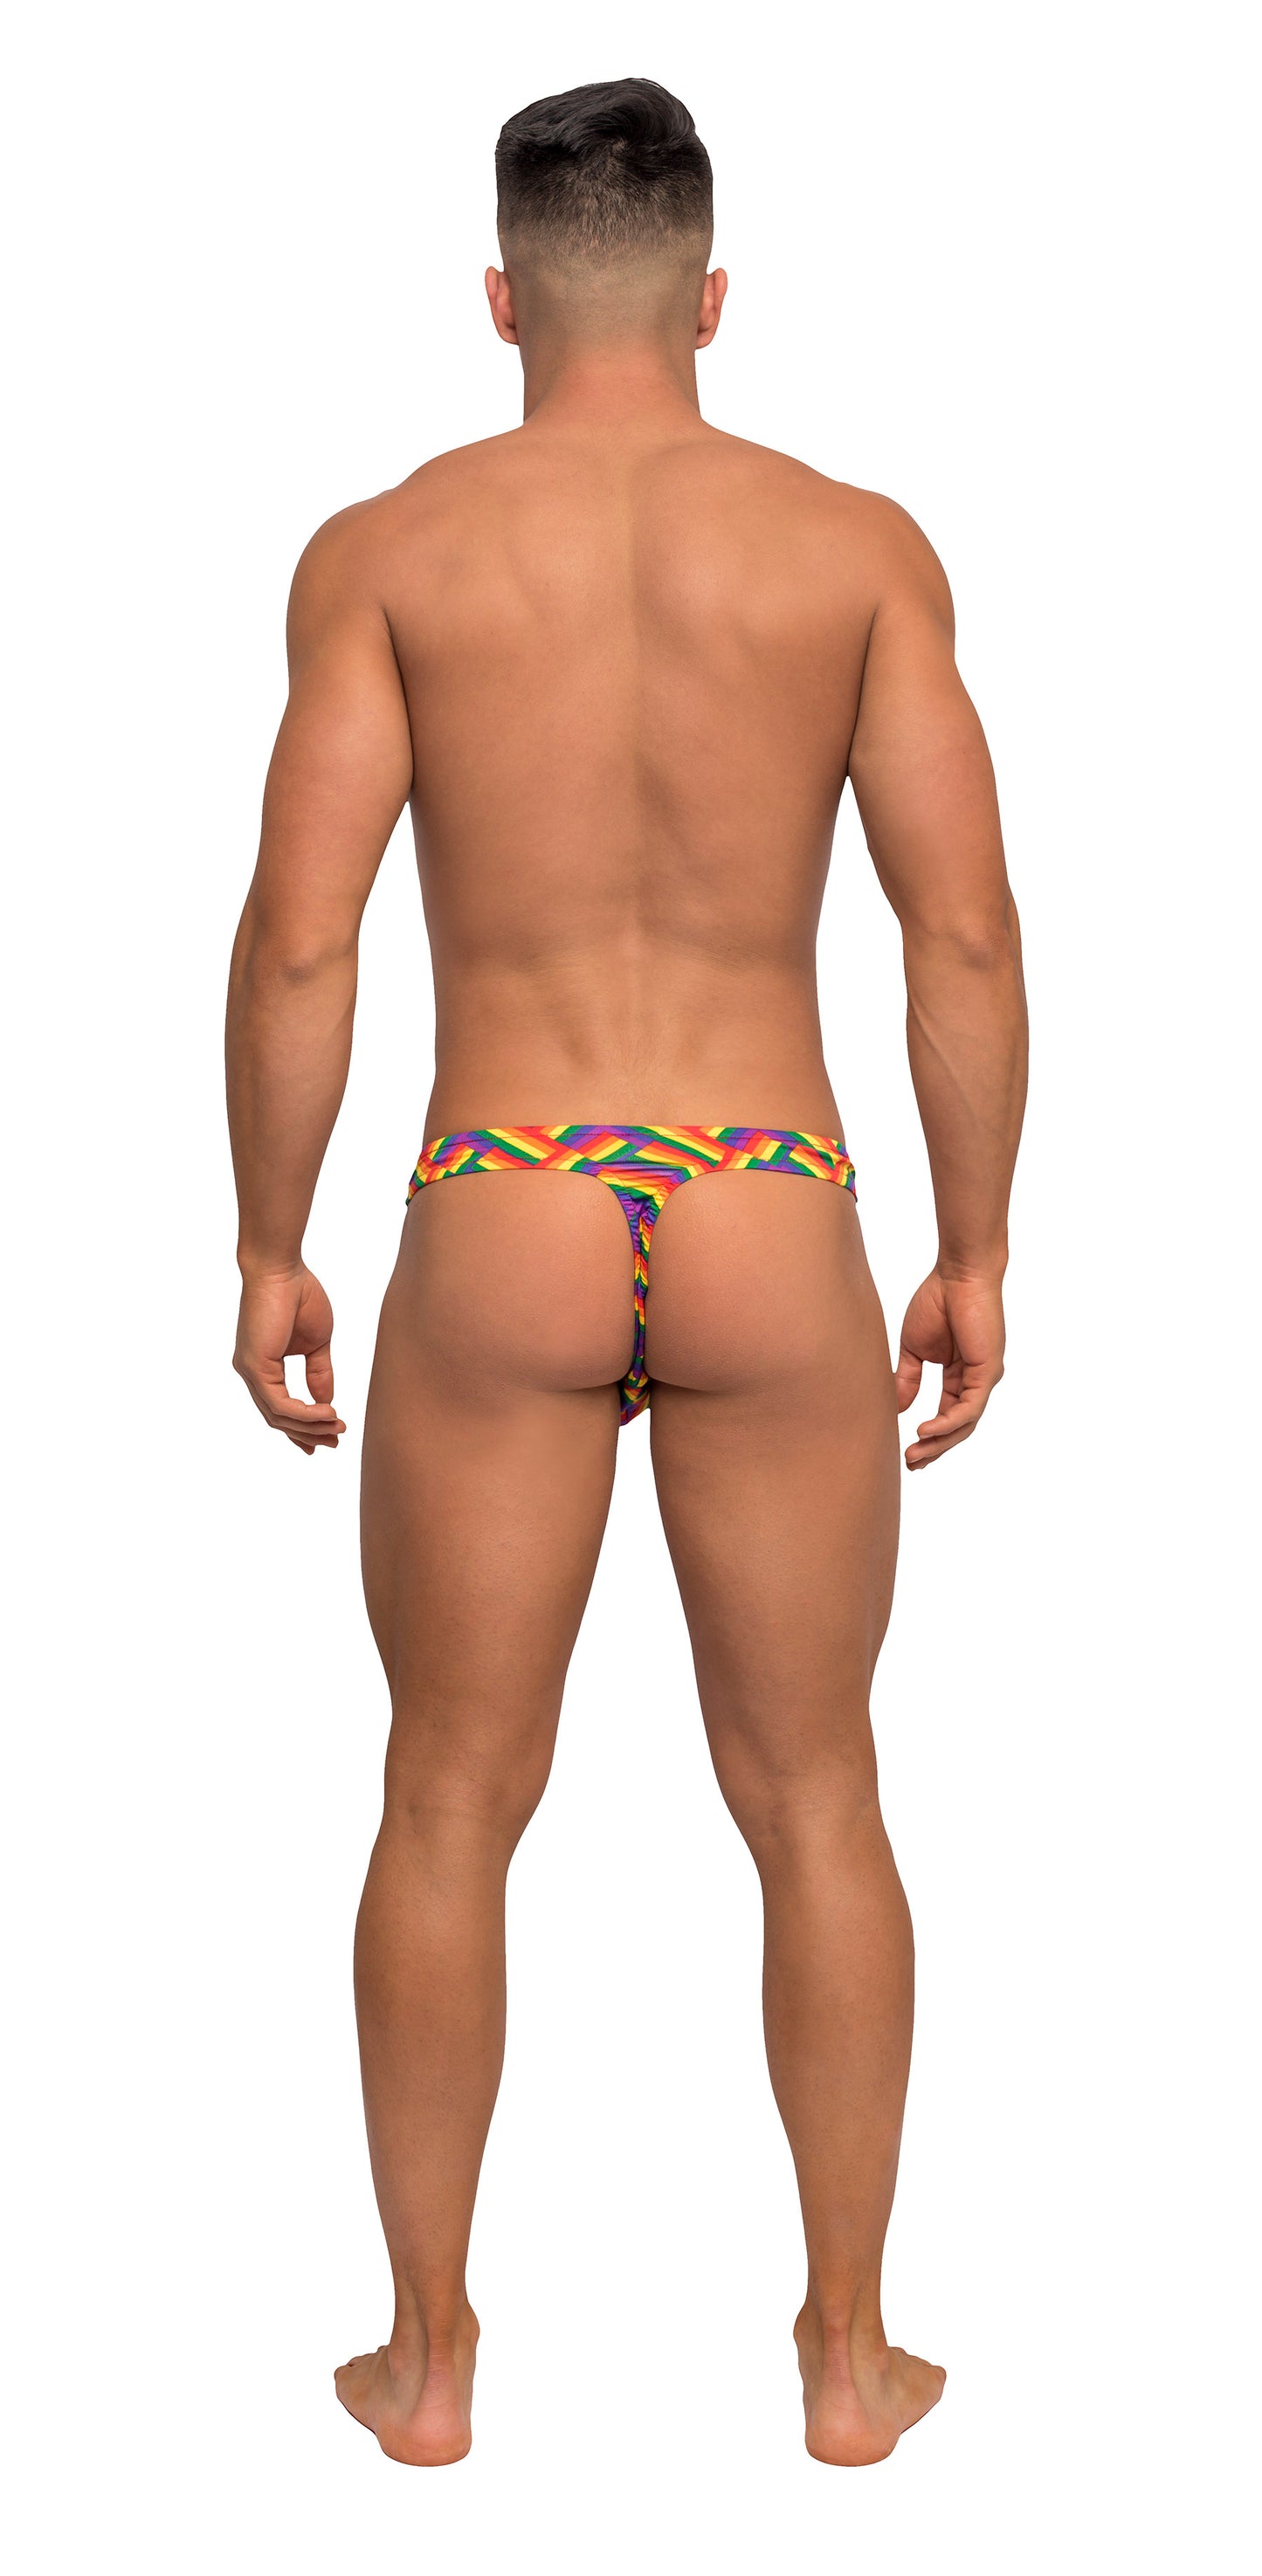 Male Power Pride Fest Bong Thong - Just for you desires